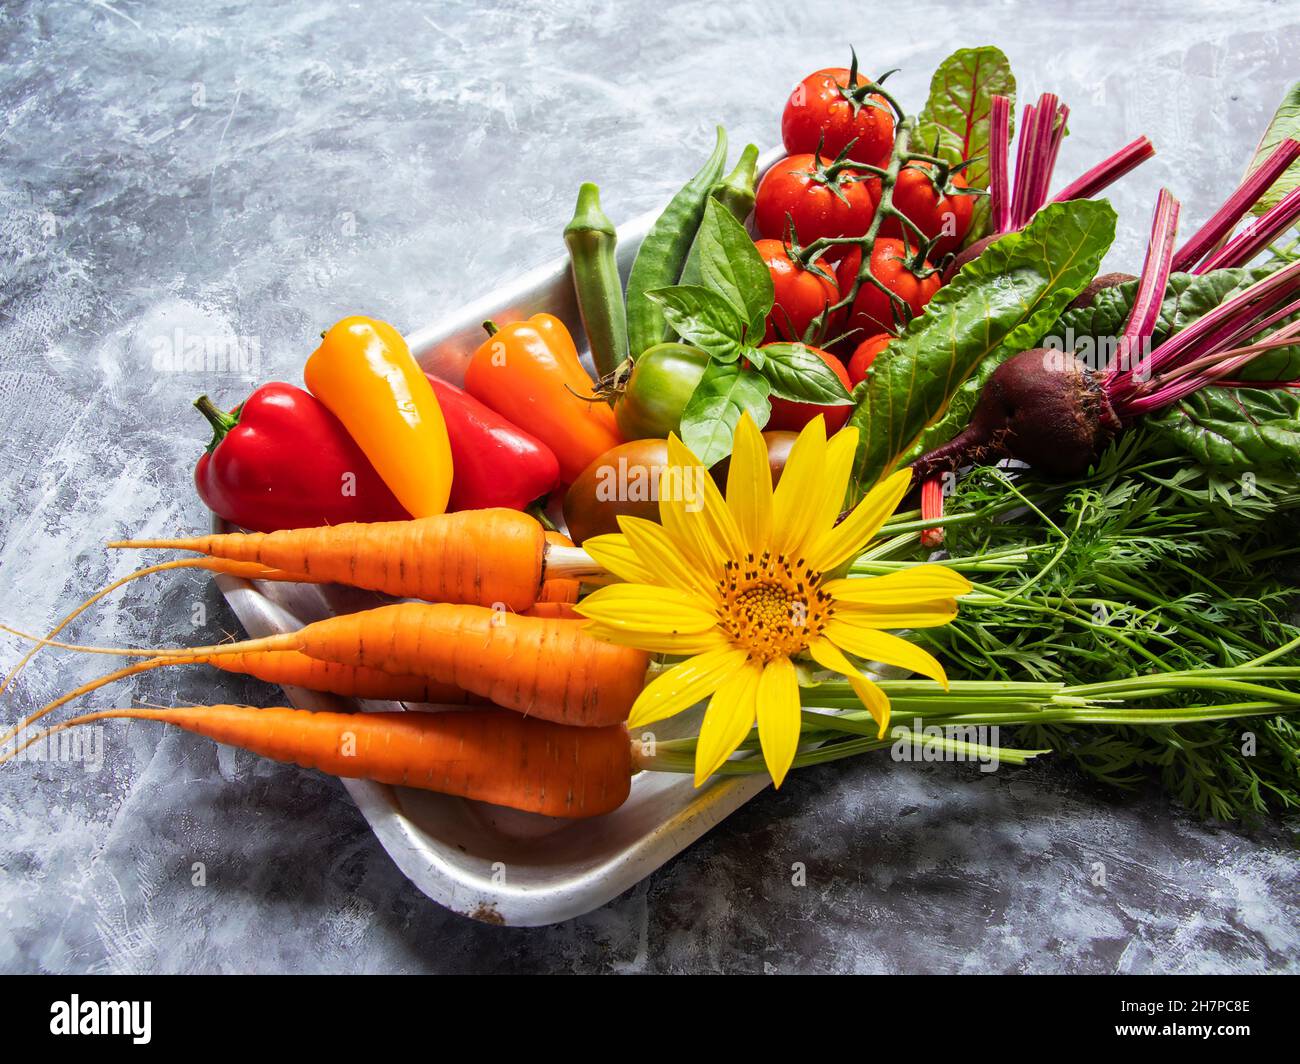 fresh raw vegetables cherry tomatoes, bell peppers, carrots, beets, okra Stock Photo